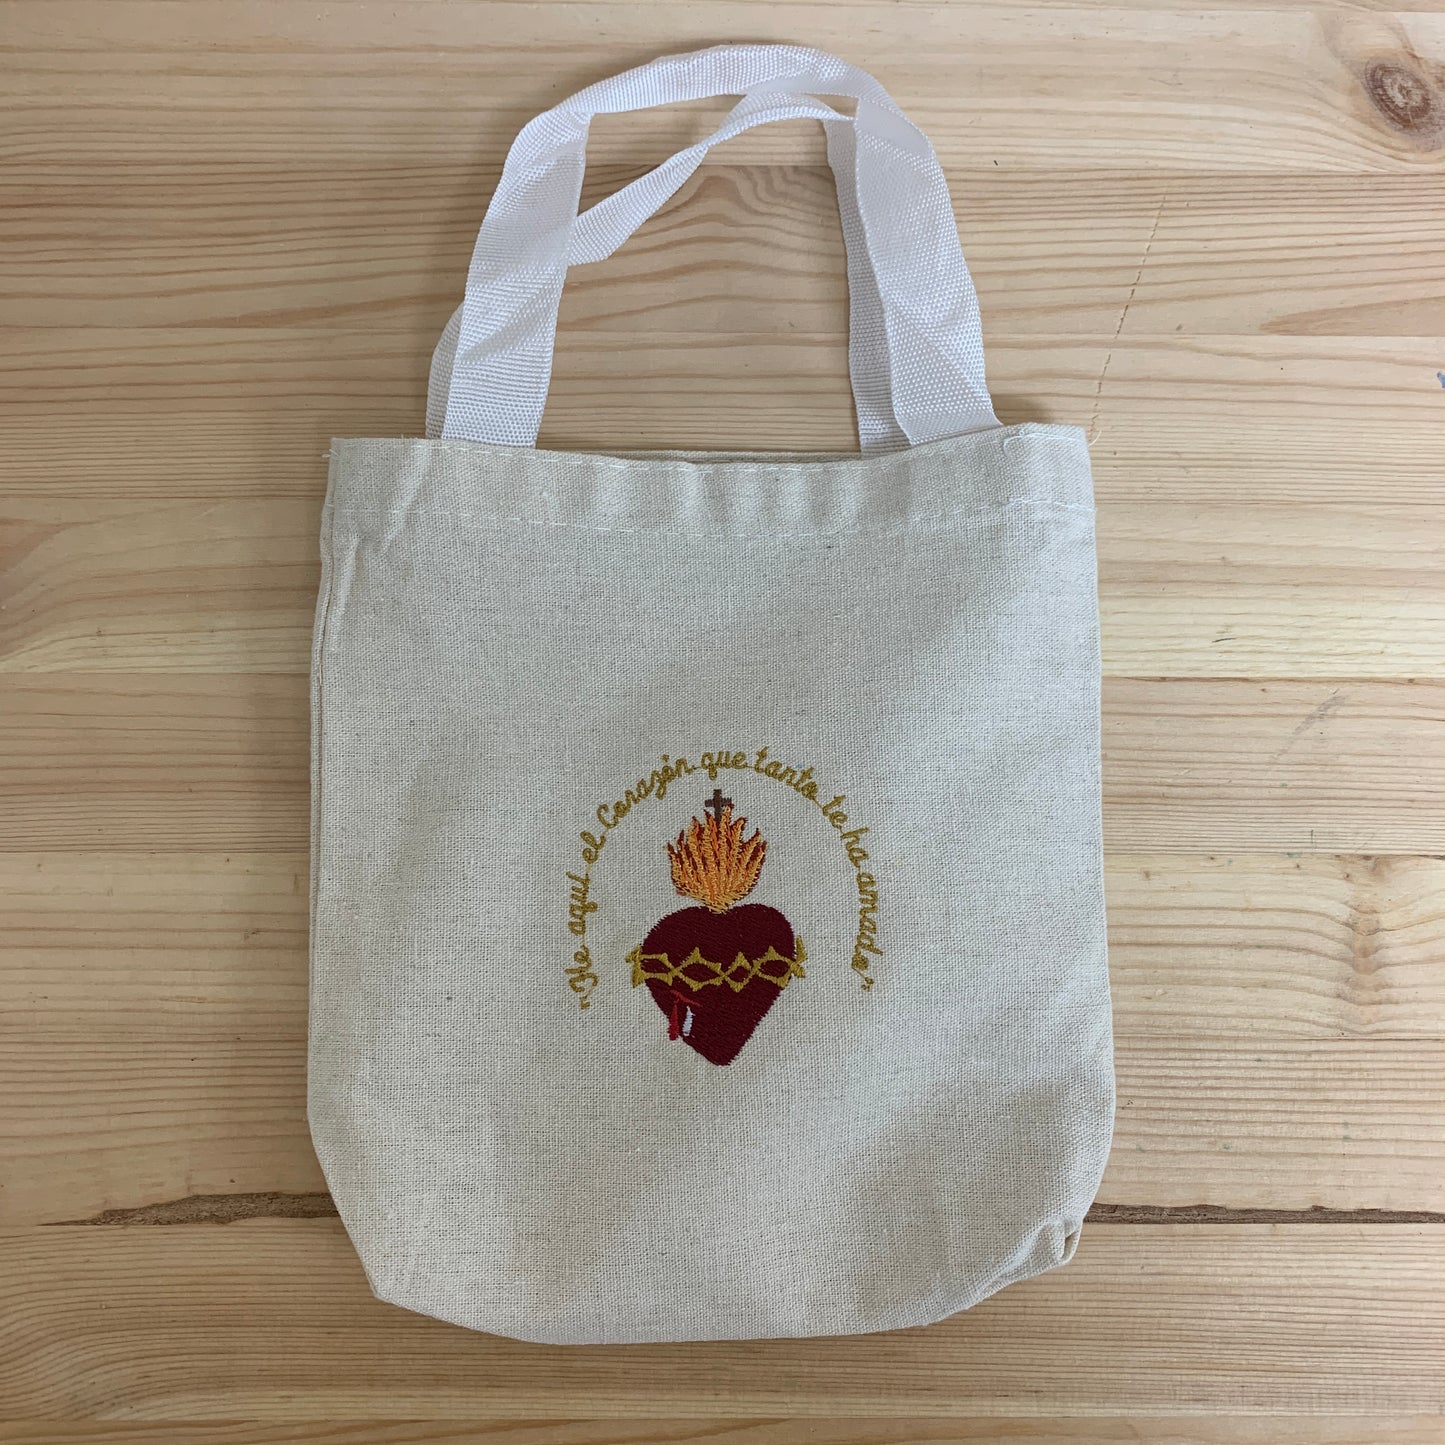 Embroidered Small Tote Bag by SCTJM